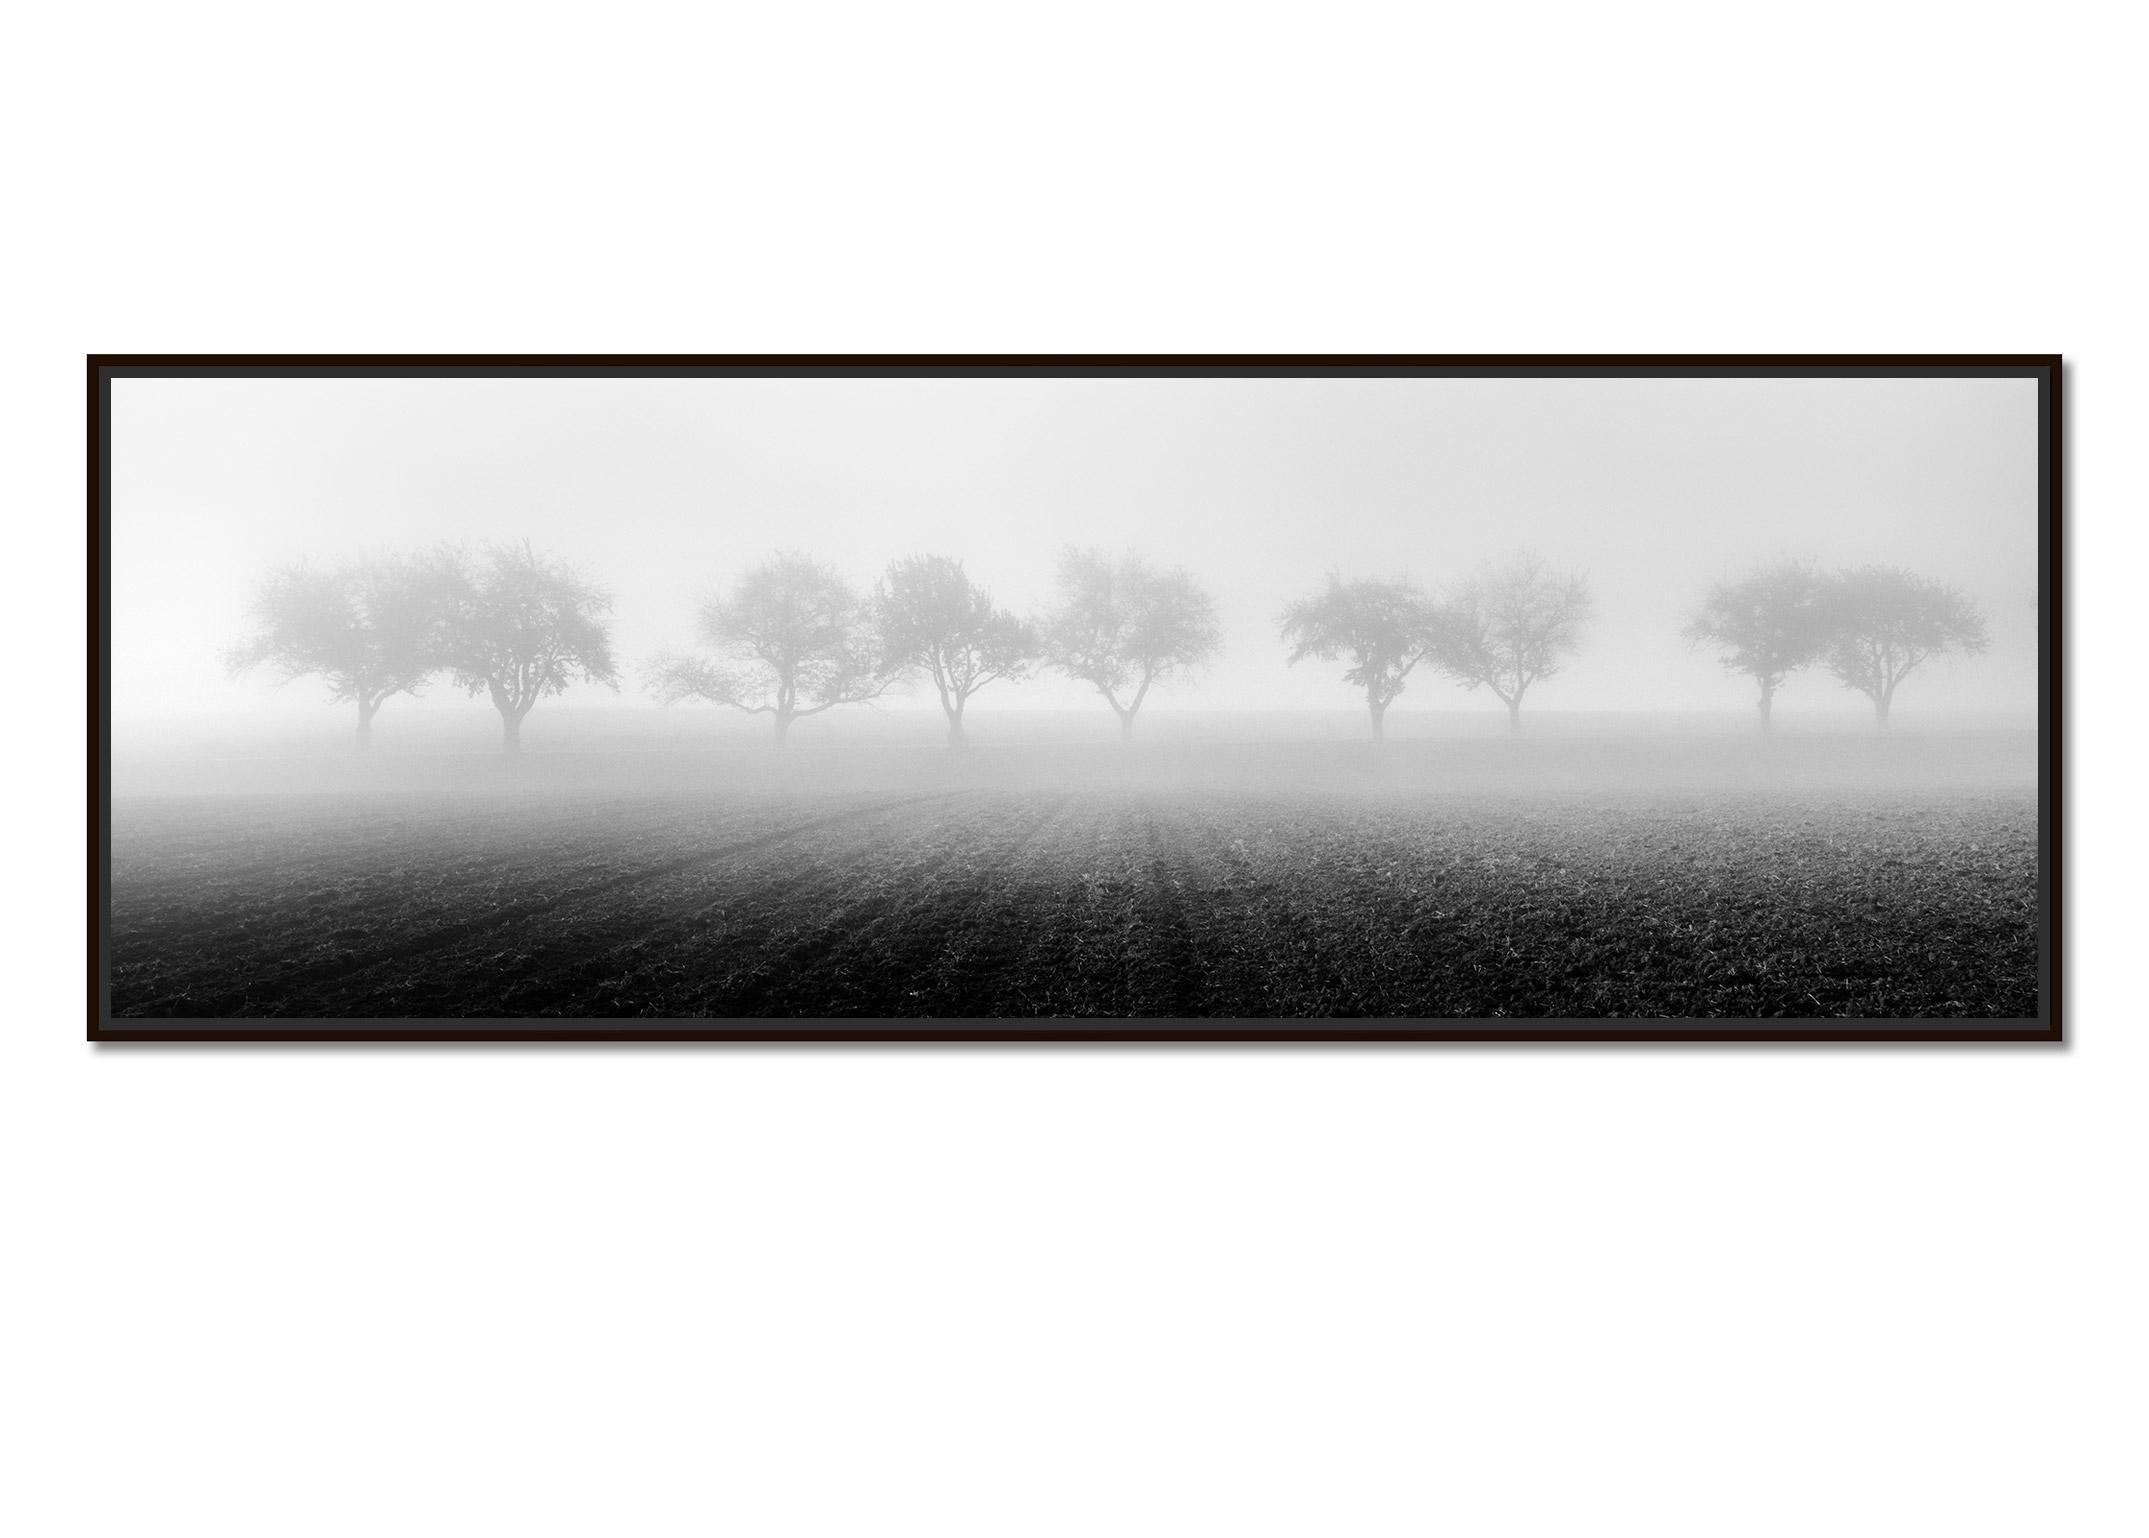 Foggy Morning, row of Cherry Trees, black and white photography, art landscape - Photograph by Gerald Berghammer